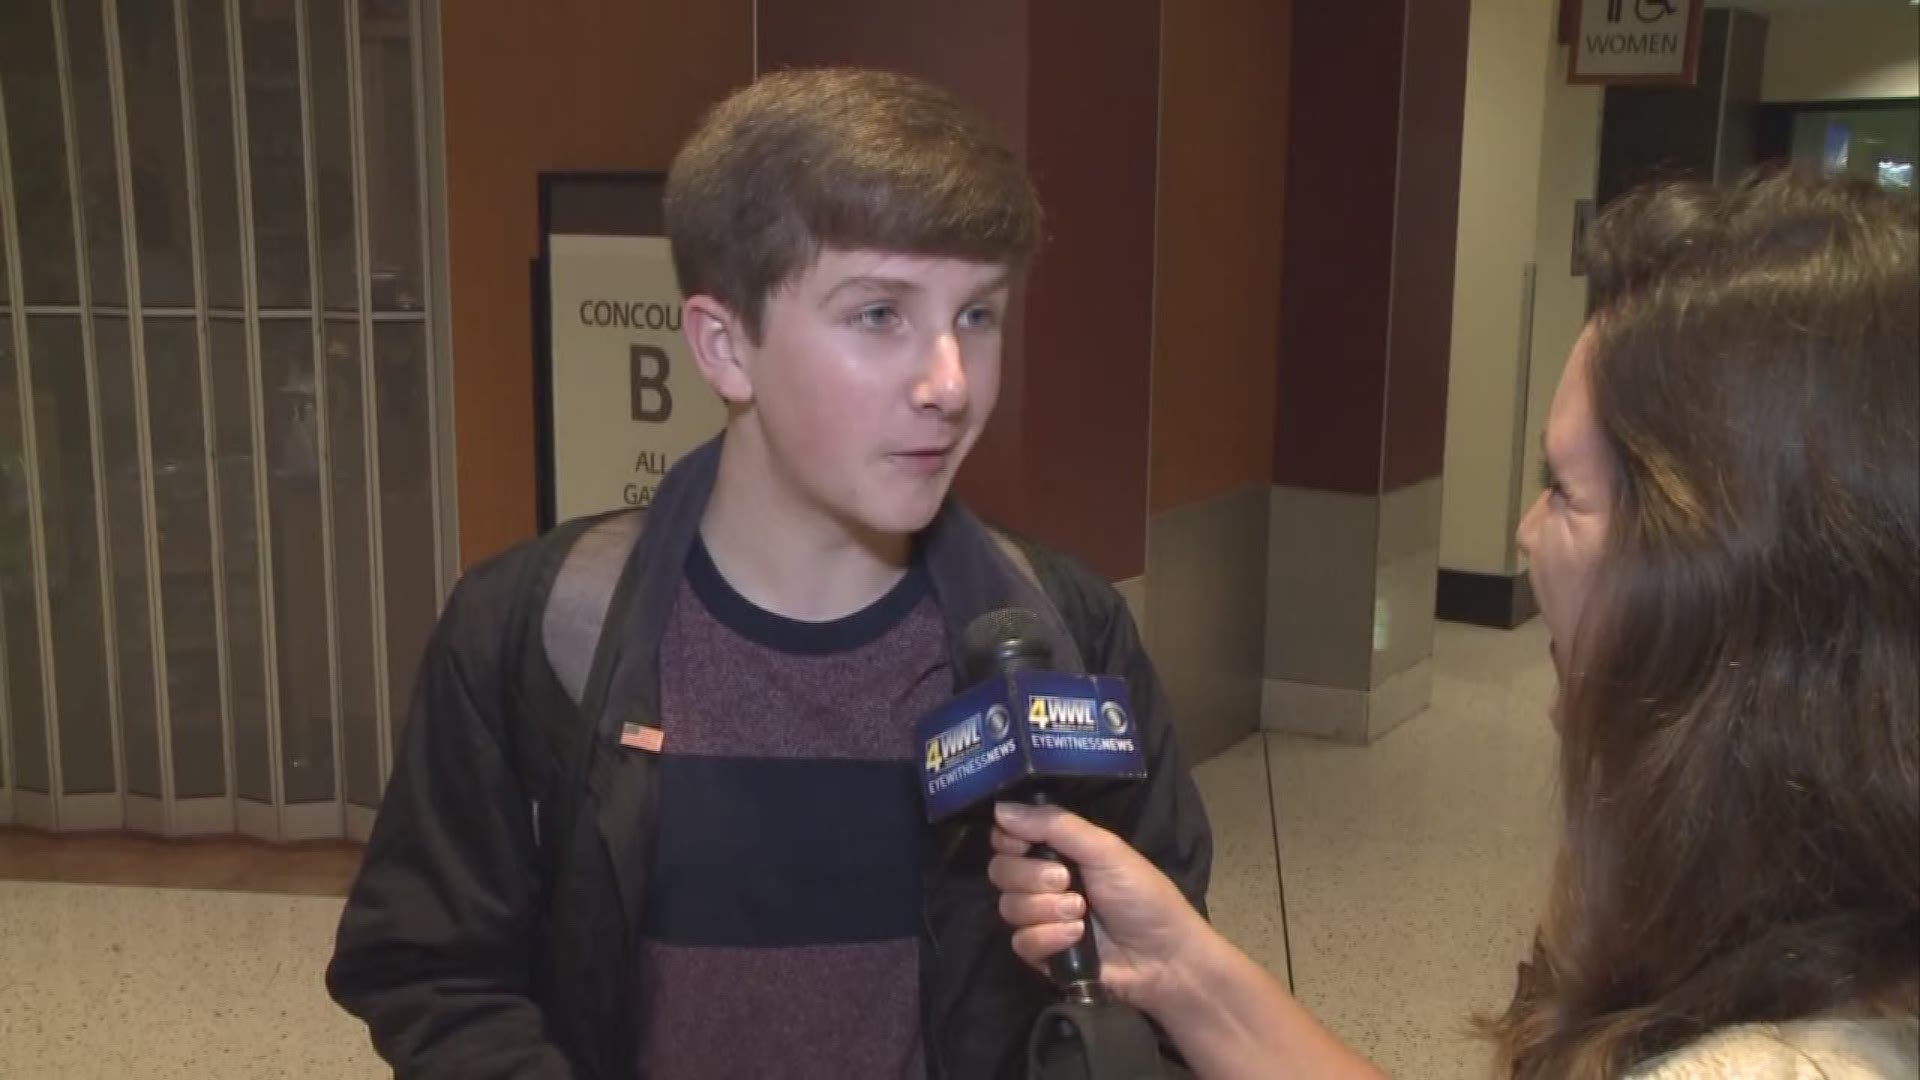 High school freshman Peyton Piper will be packing his bags and heading to Washington, D.C. for the presidential inauguration.